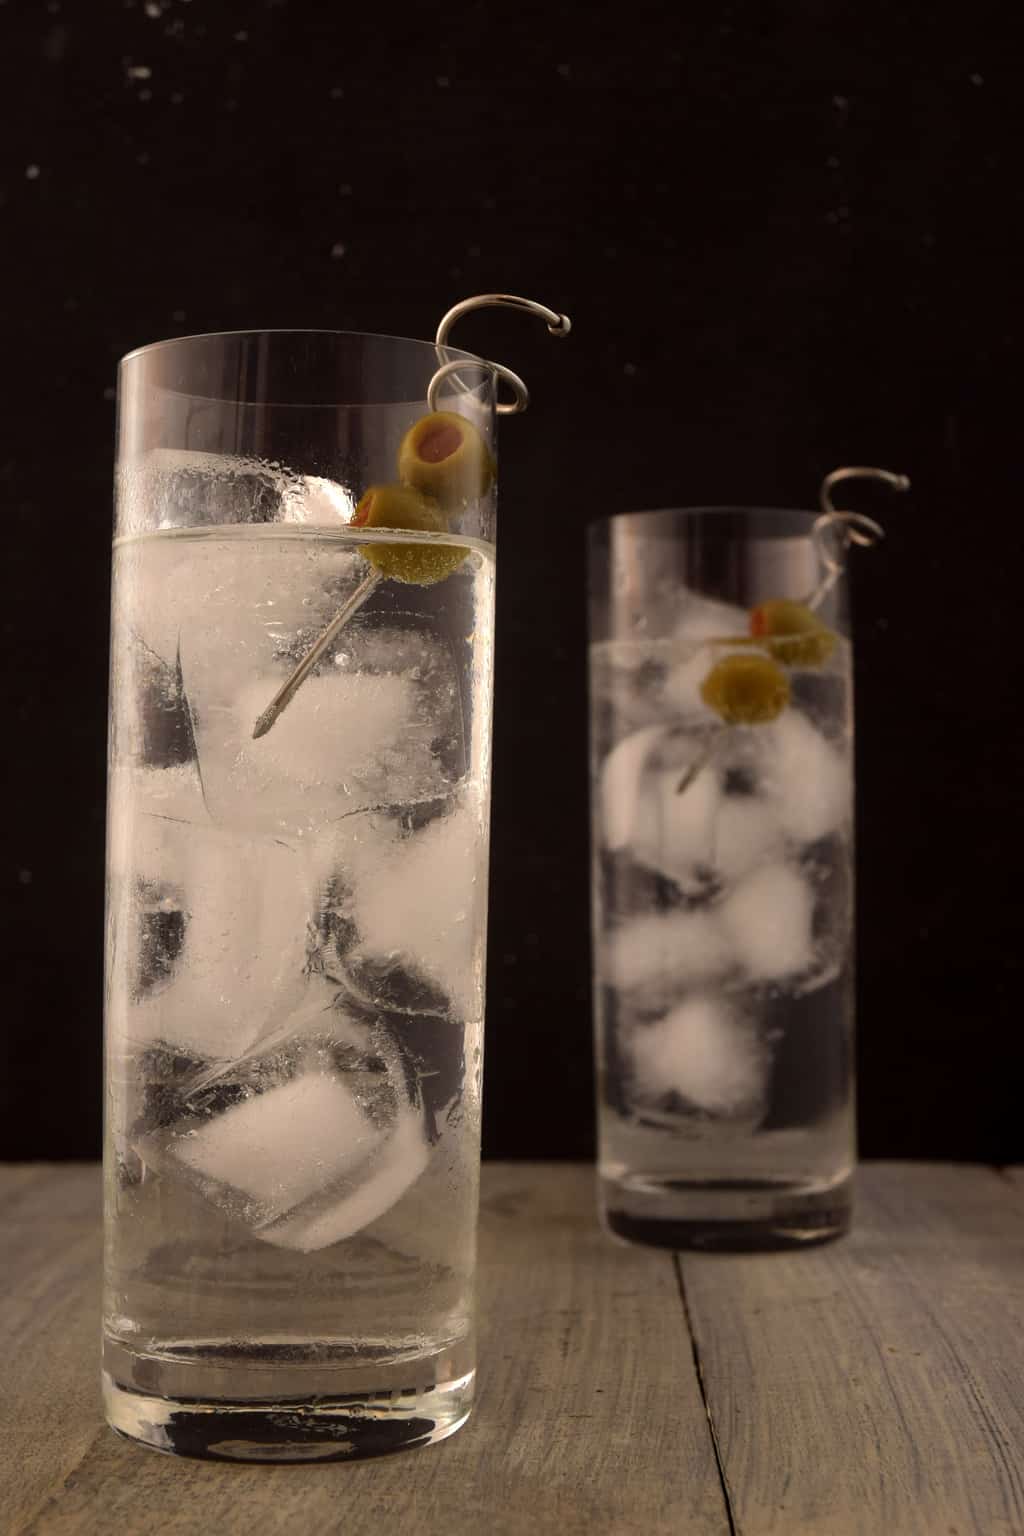 Low-Carb Vodka and Sprite